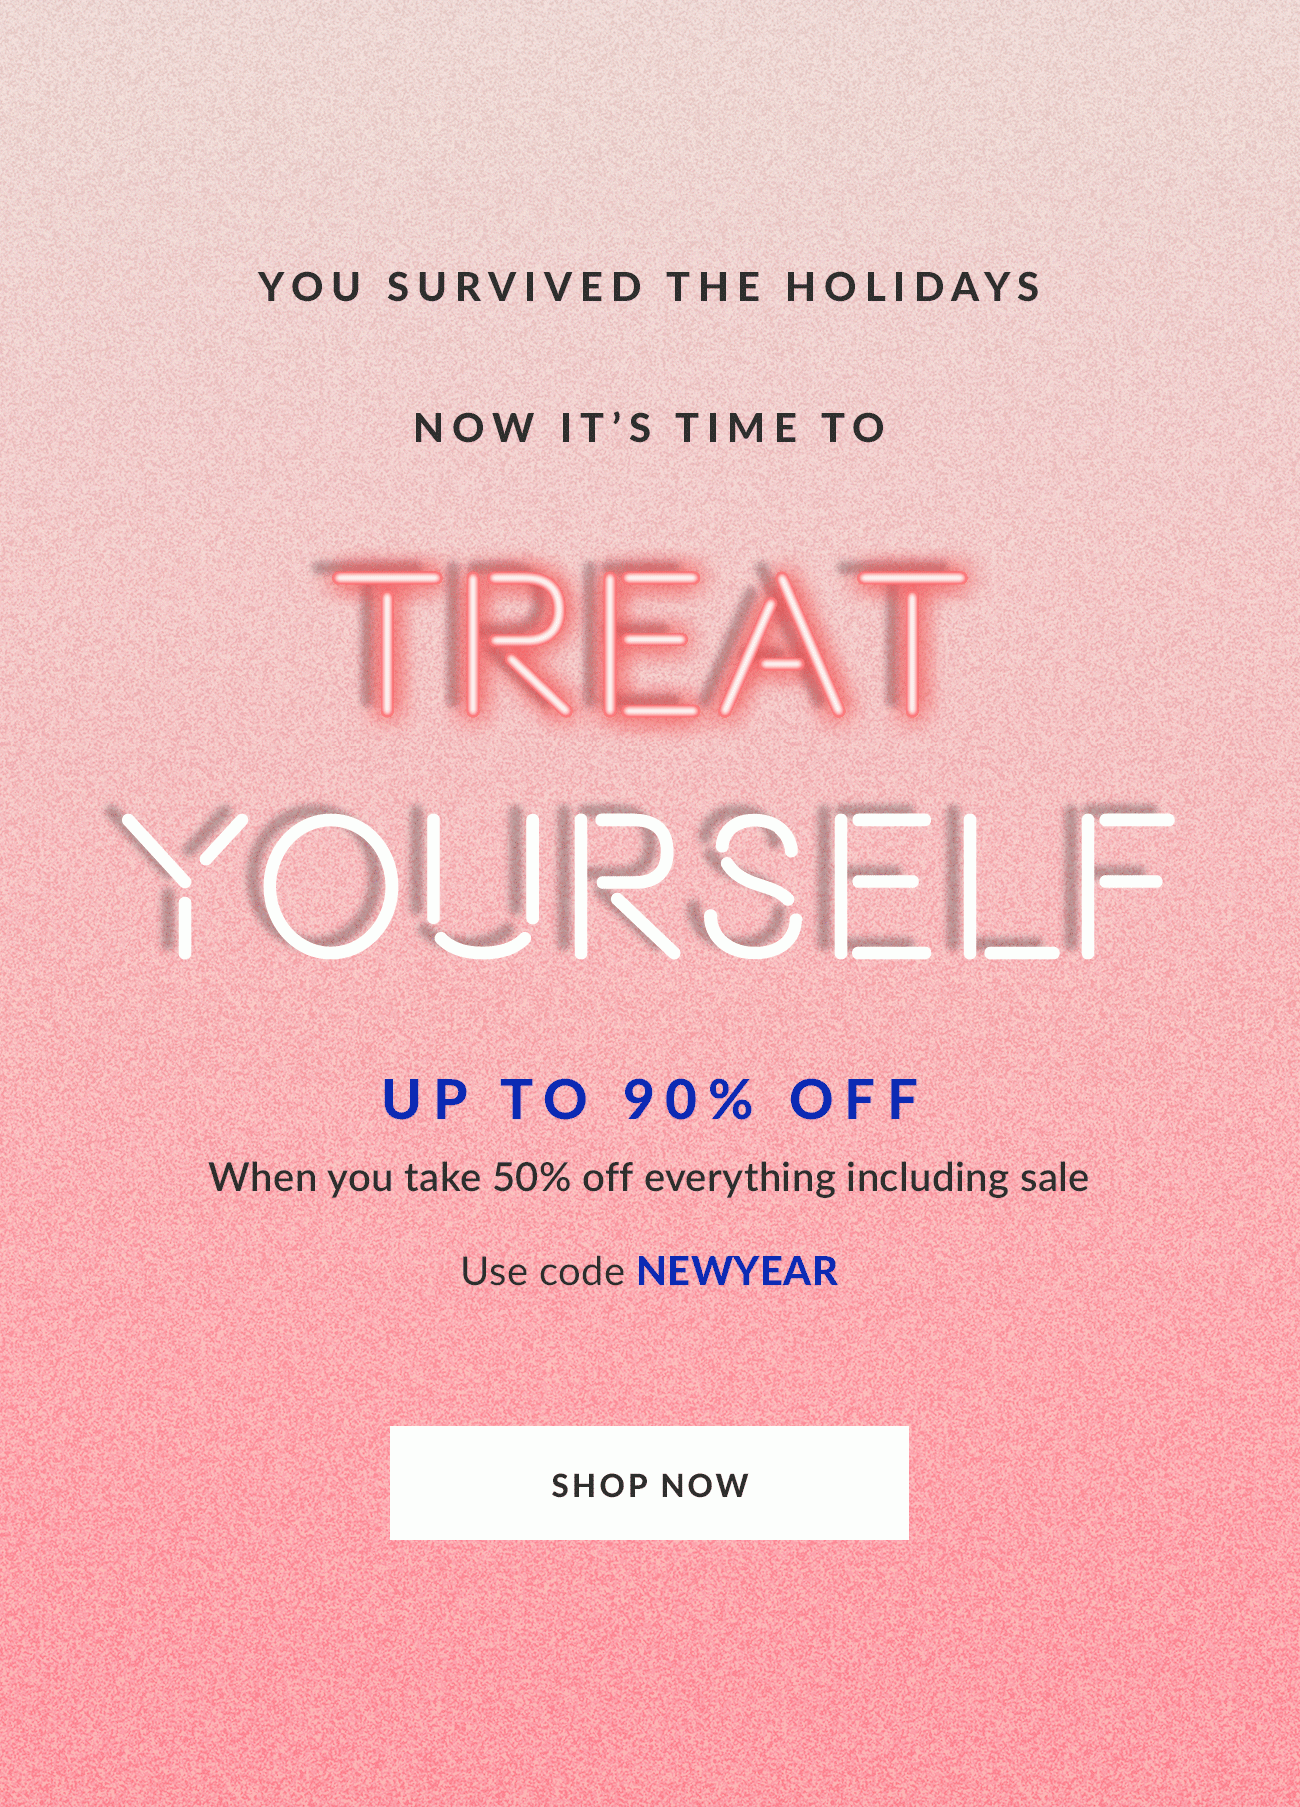 Treat Yourself - Up to 90% OFF - Code: NEWYEAR - Shop Now